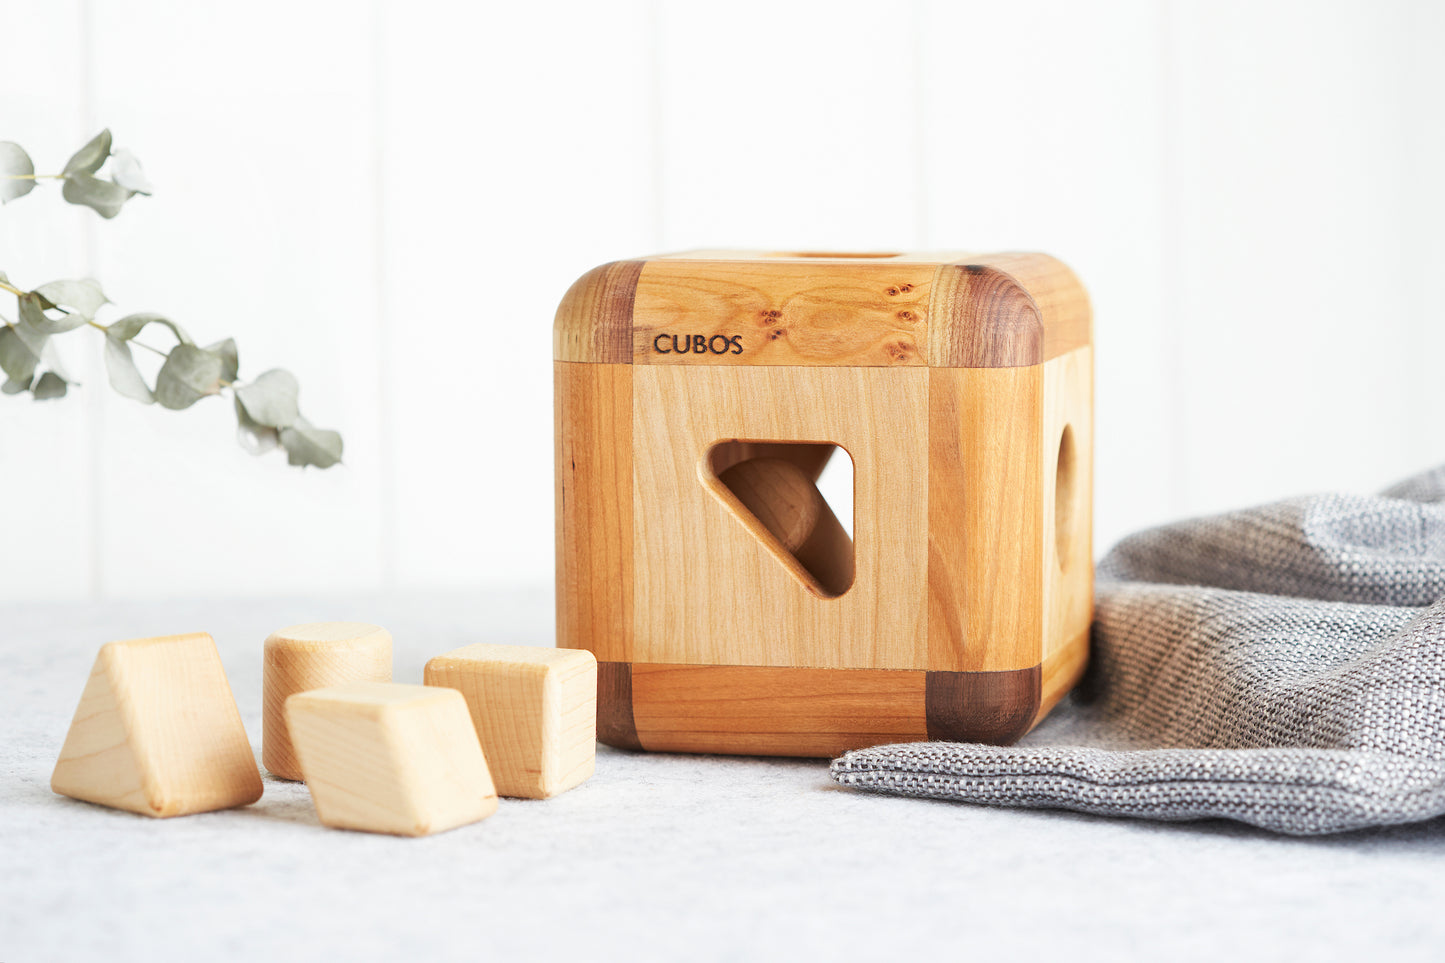 CUBOS with Walnut inserts (100% Natural,Shape Sorter,Heirloom Quality, Hardwood, Made in Canada)